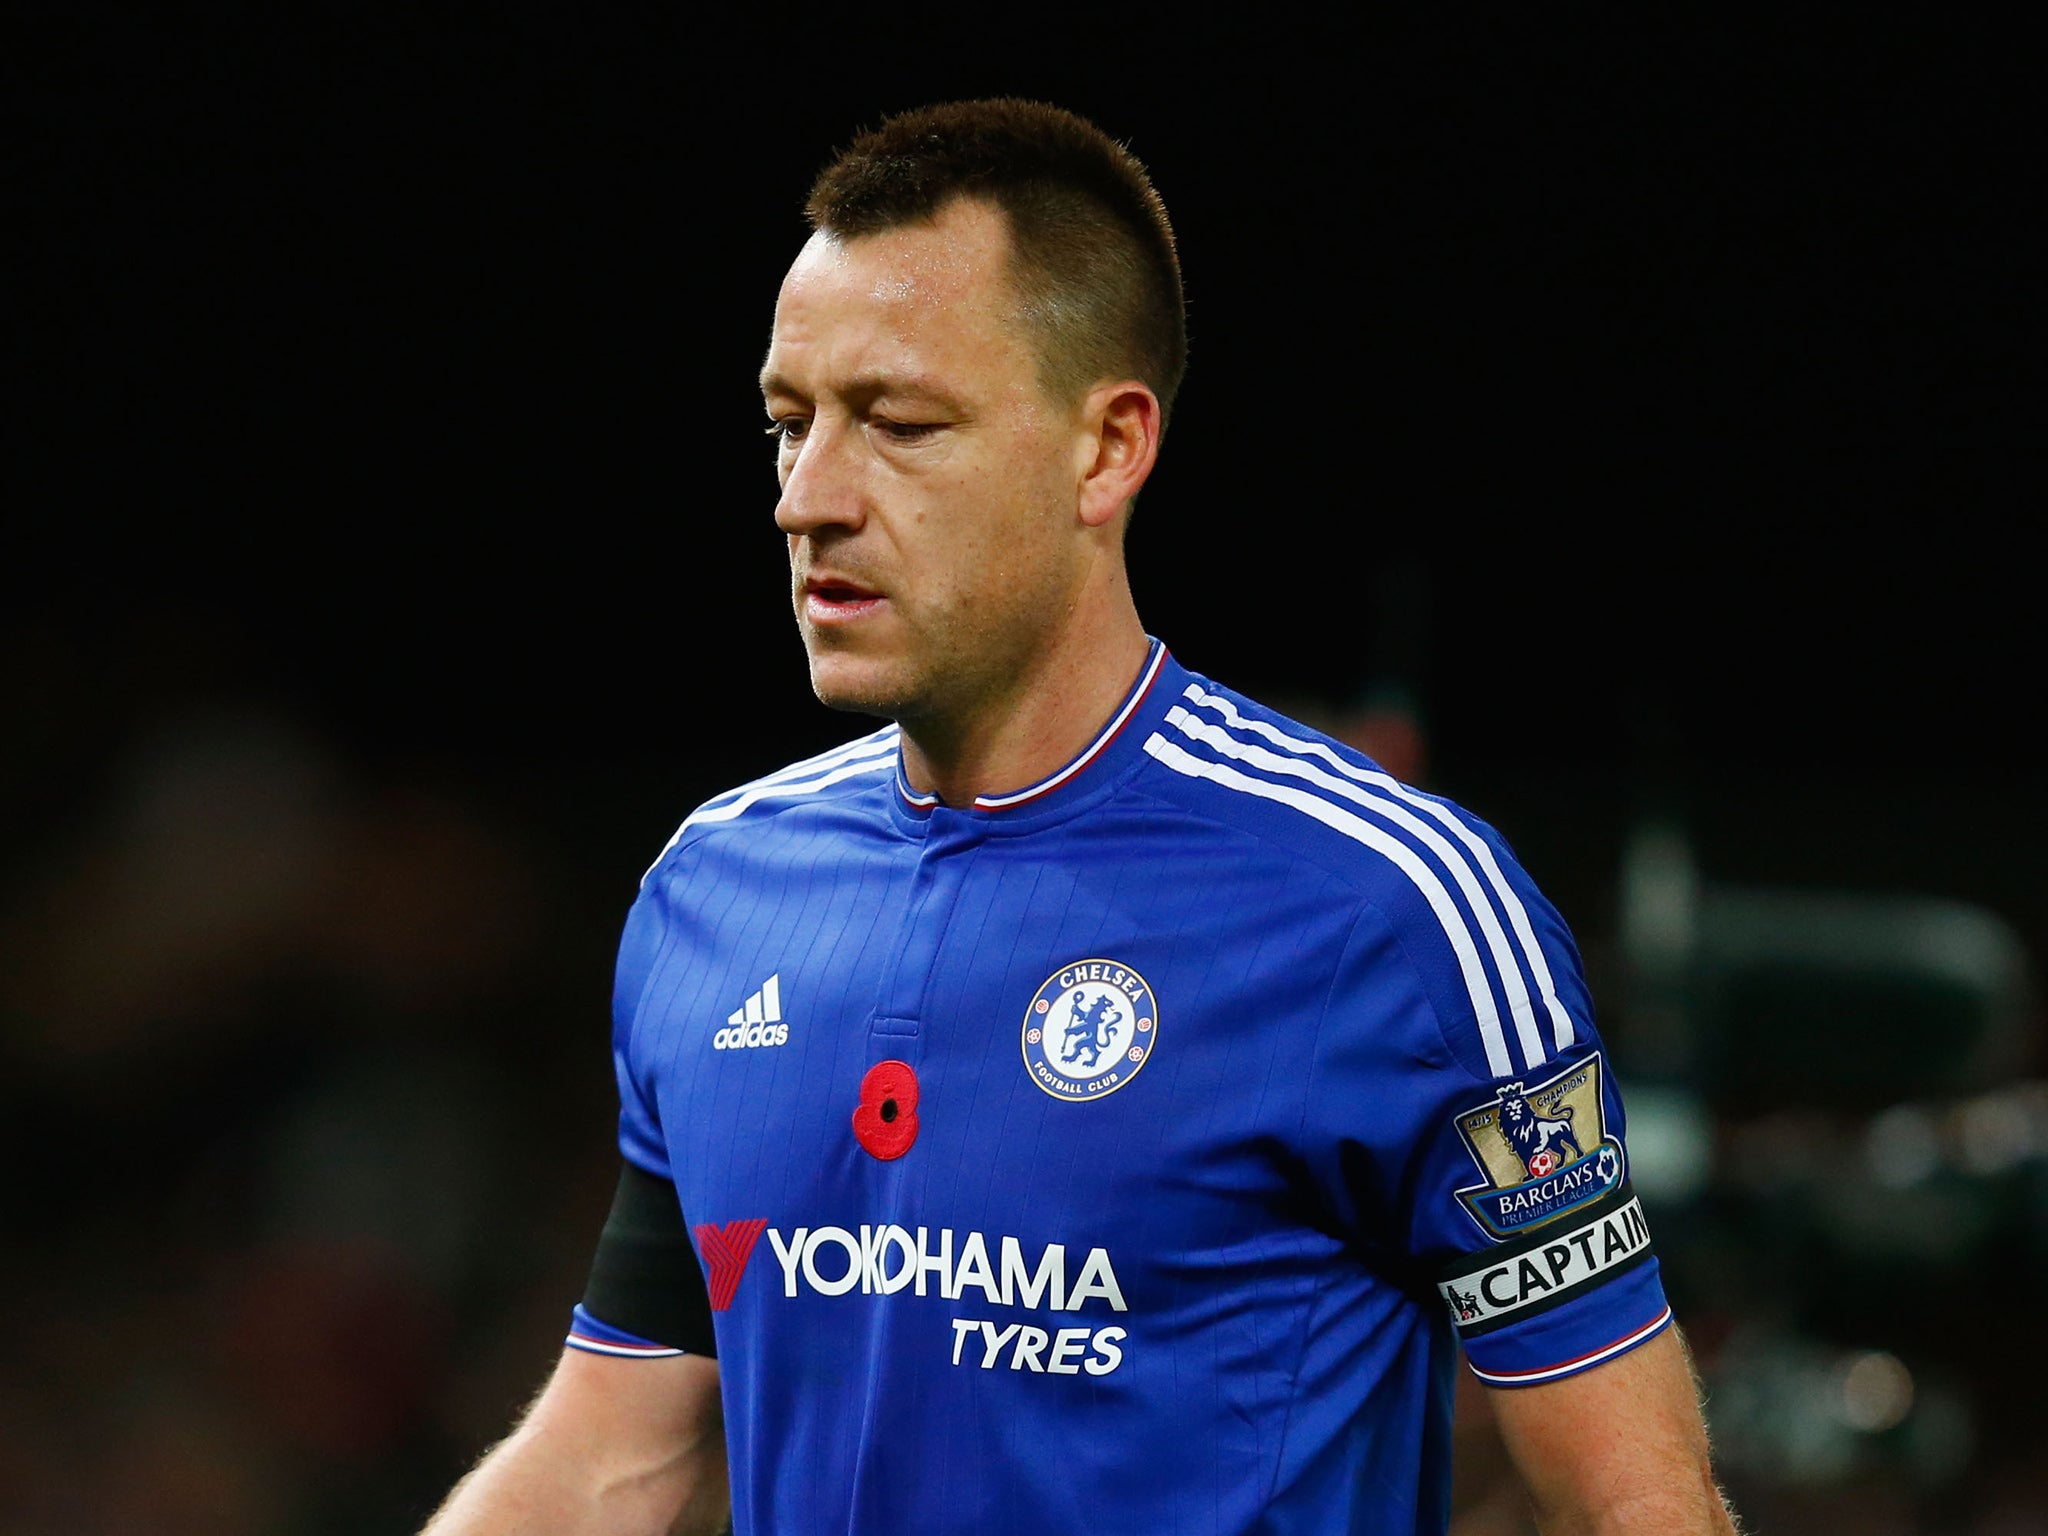 John Terry leaves the field dejected following the defeat at Stoke